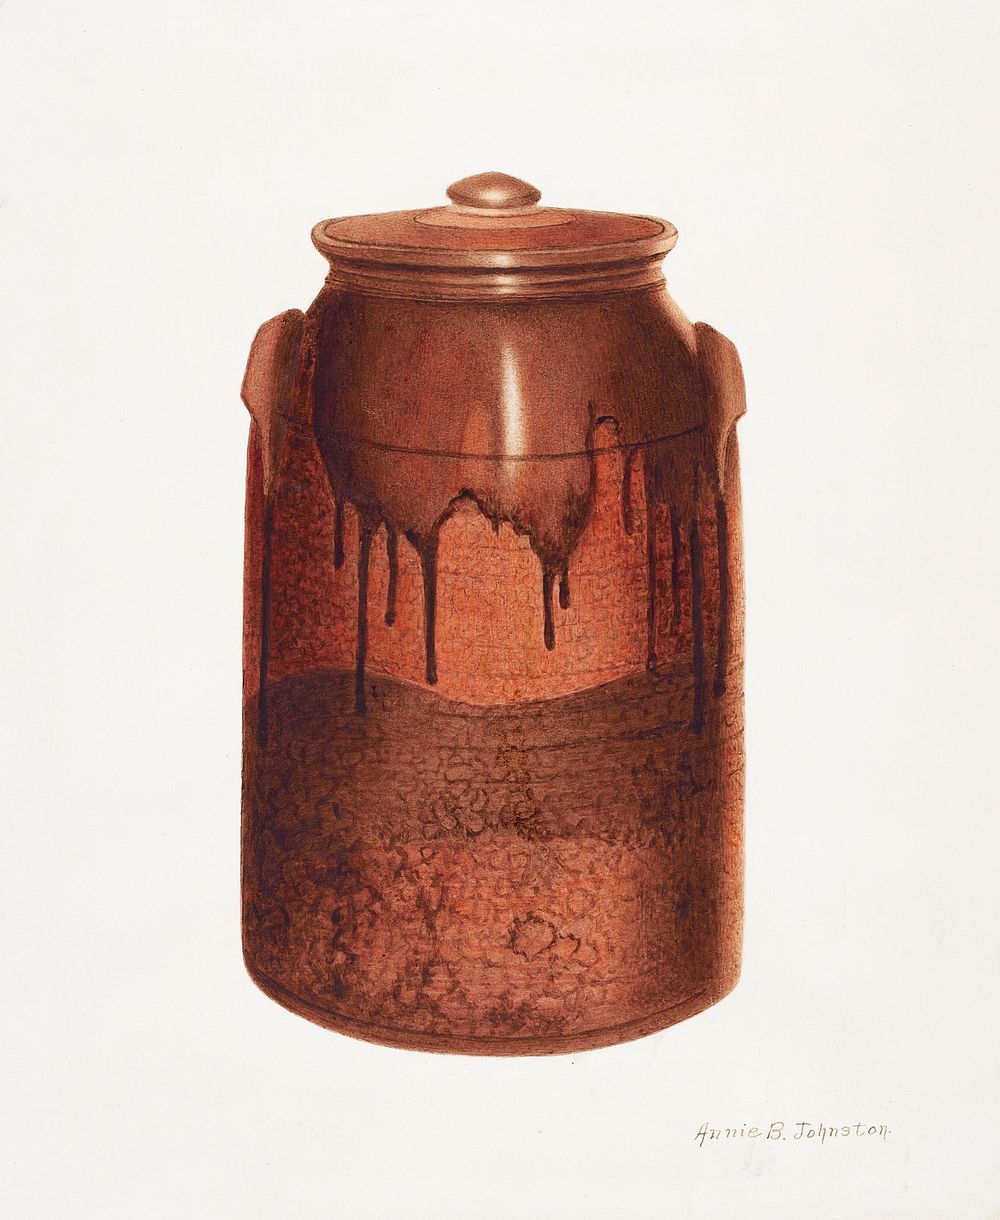 Pottery Jar with Lid (ca.1938) by Annie B. Johnston. Original from The National Gallery of Art. Digitally enhanced by…